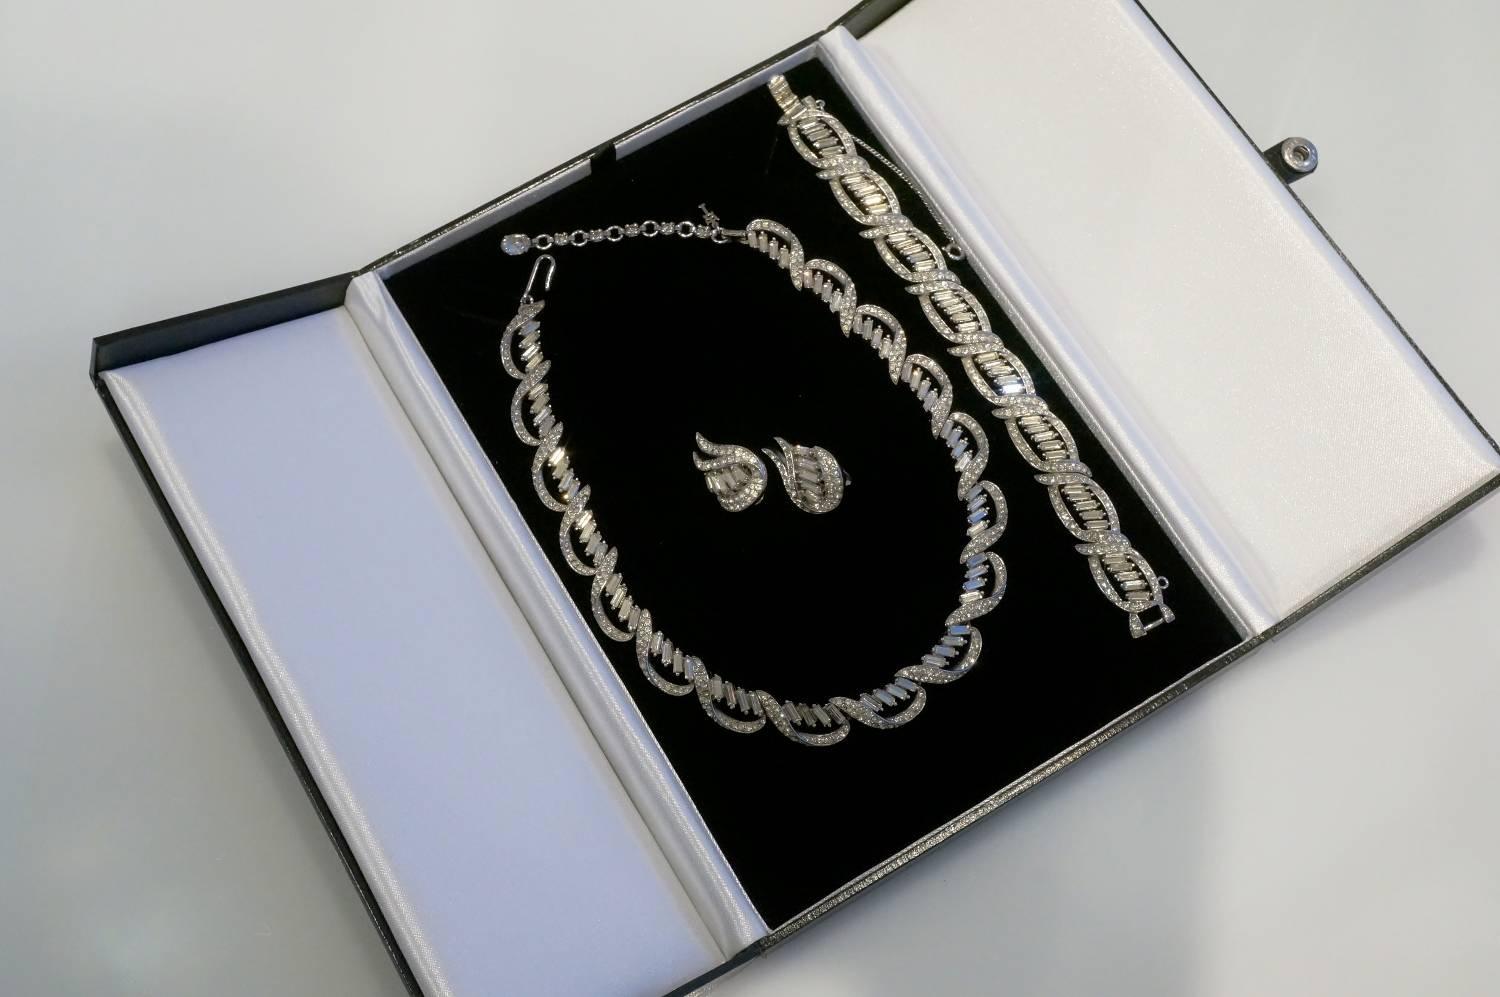 Trifari jewelry set necklace, bracelet and earrings, circa 1950s, USA. Baguette cut and chaton cut rhinestones on a rhodium plate frame. The necklace is finished with a large rhinestone and a Trifari key. The bracelet has a safety chain which is in